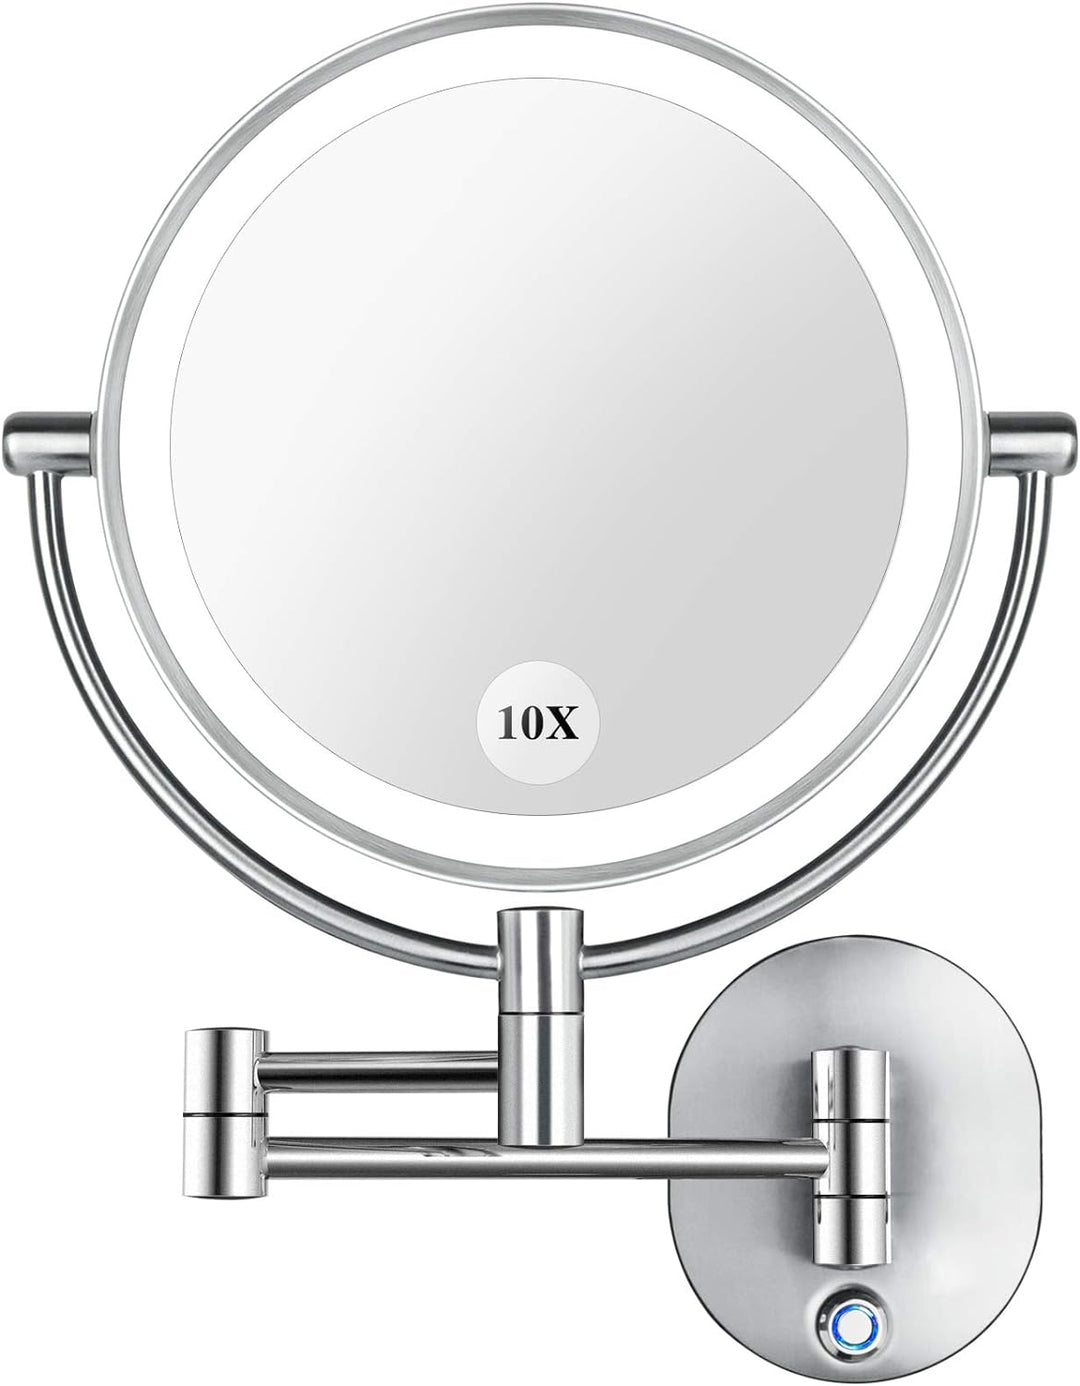 Vanity Mirror 8.5" LED Double Sided Swivel Wall Mount Makeup Mirror with 10X Magnification,13.7" Extension,Touch Button Adjustable Light,Suitable for Bedroom or Bathroom